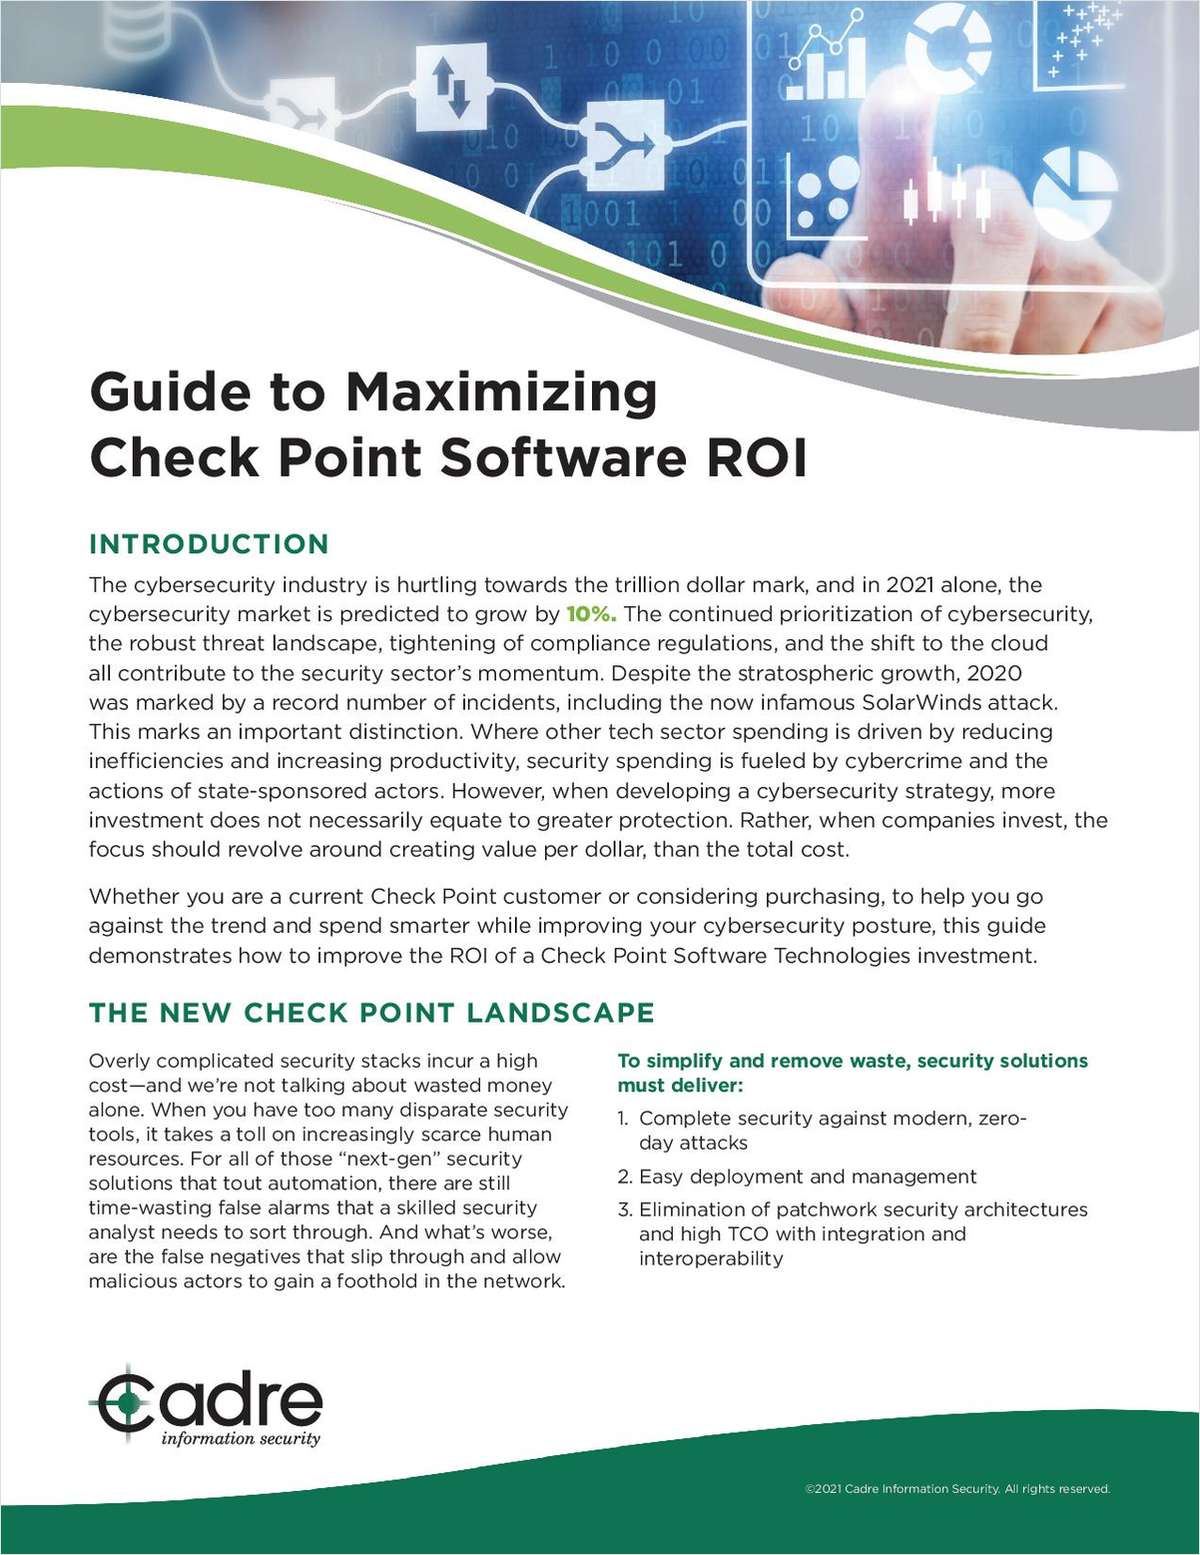 Guide to Maximizing Check Point Software ROI